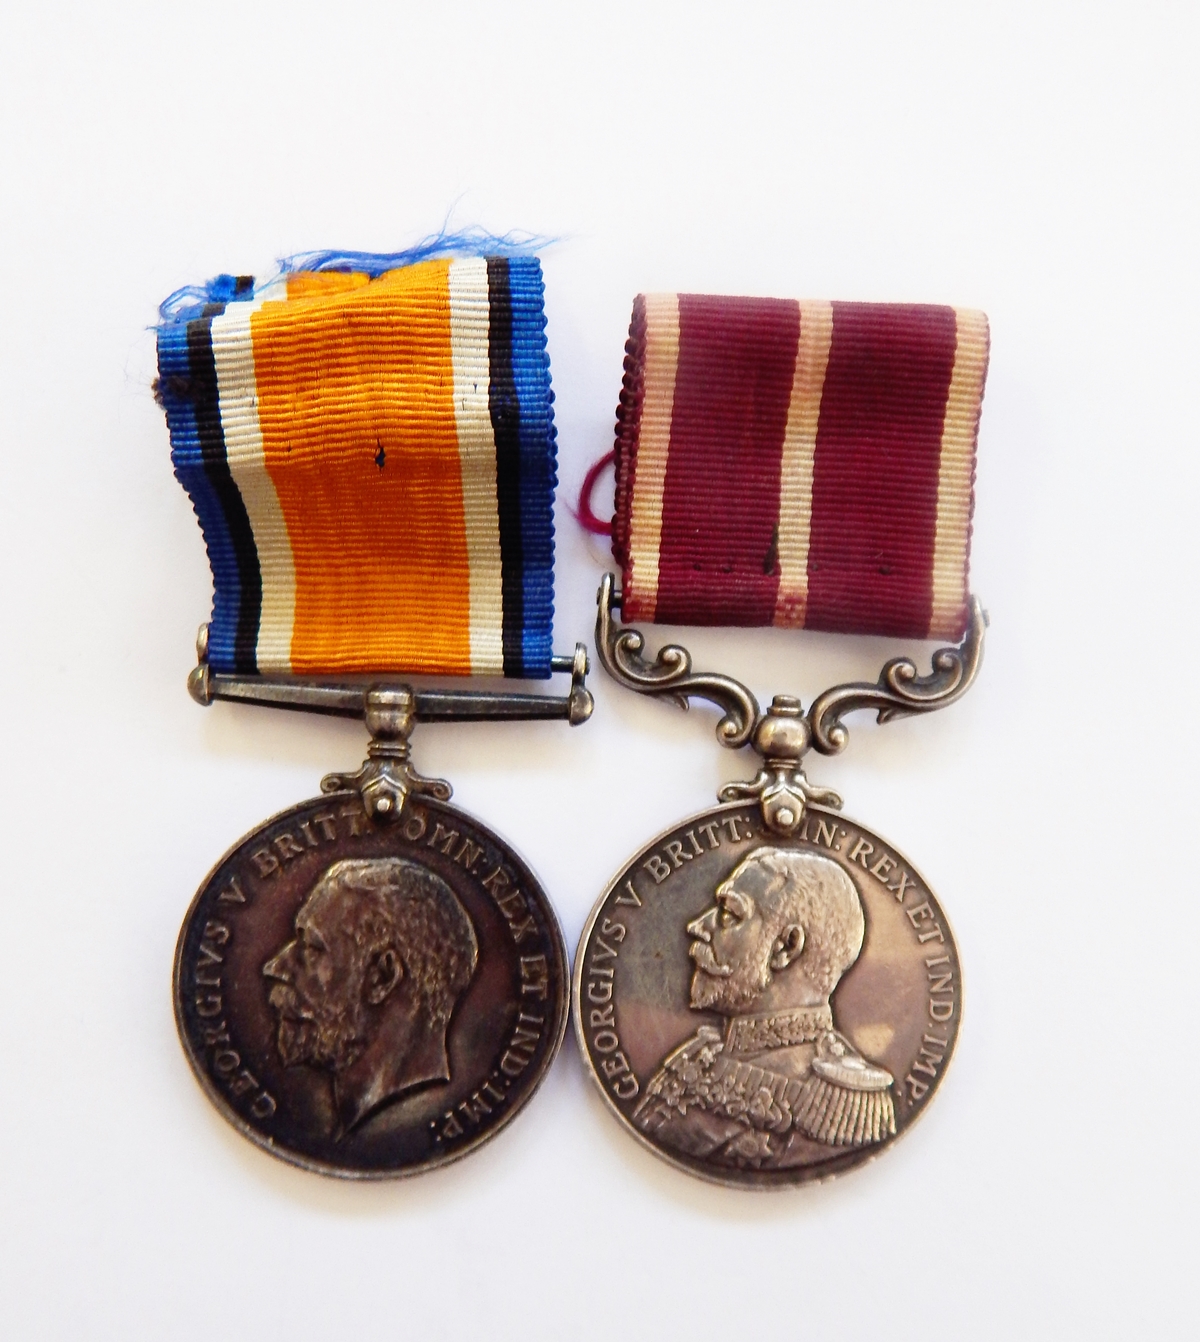 WWI Meritorious Service medal and War medal named to 'M15318 H L SHAFTOE SHIPWT 3CL 'Glory'